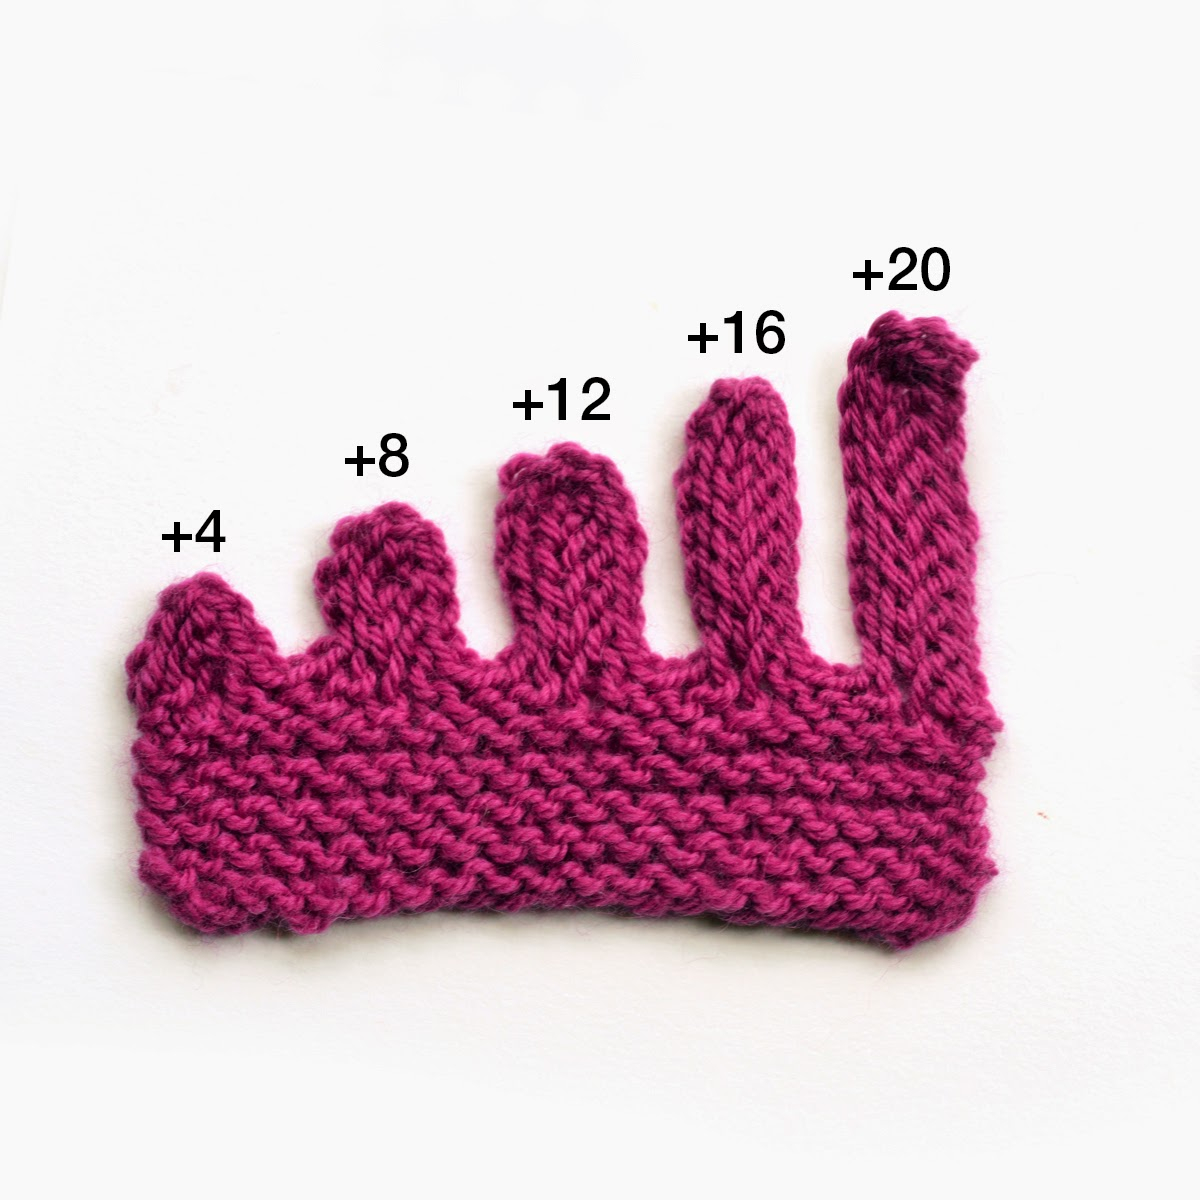 Learn Knitting Patterns So I Make Stuff Learn To Use Stacked Increases